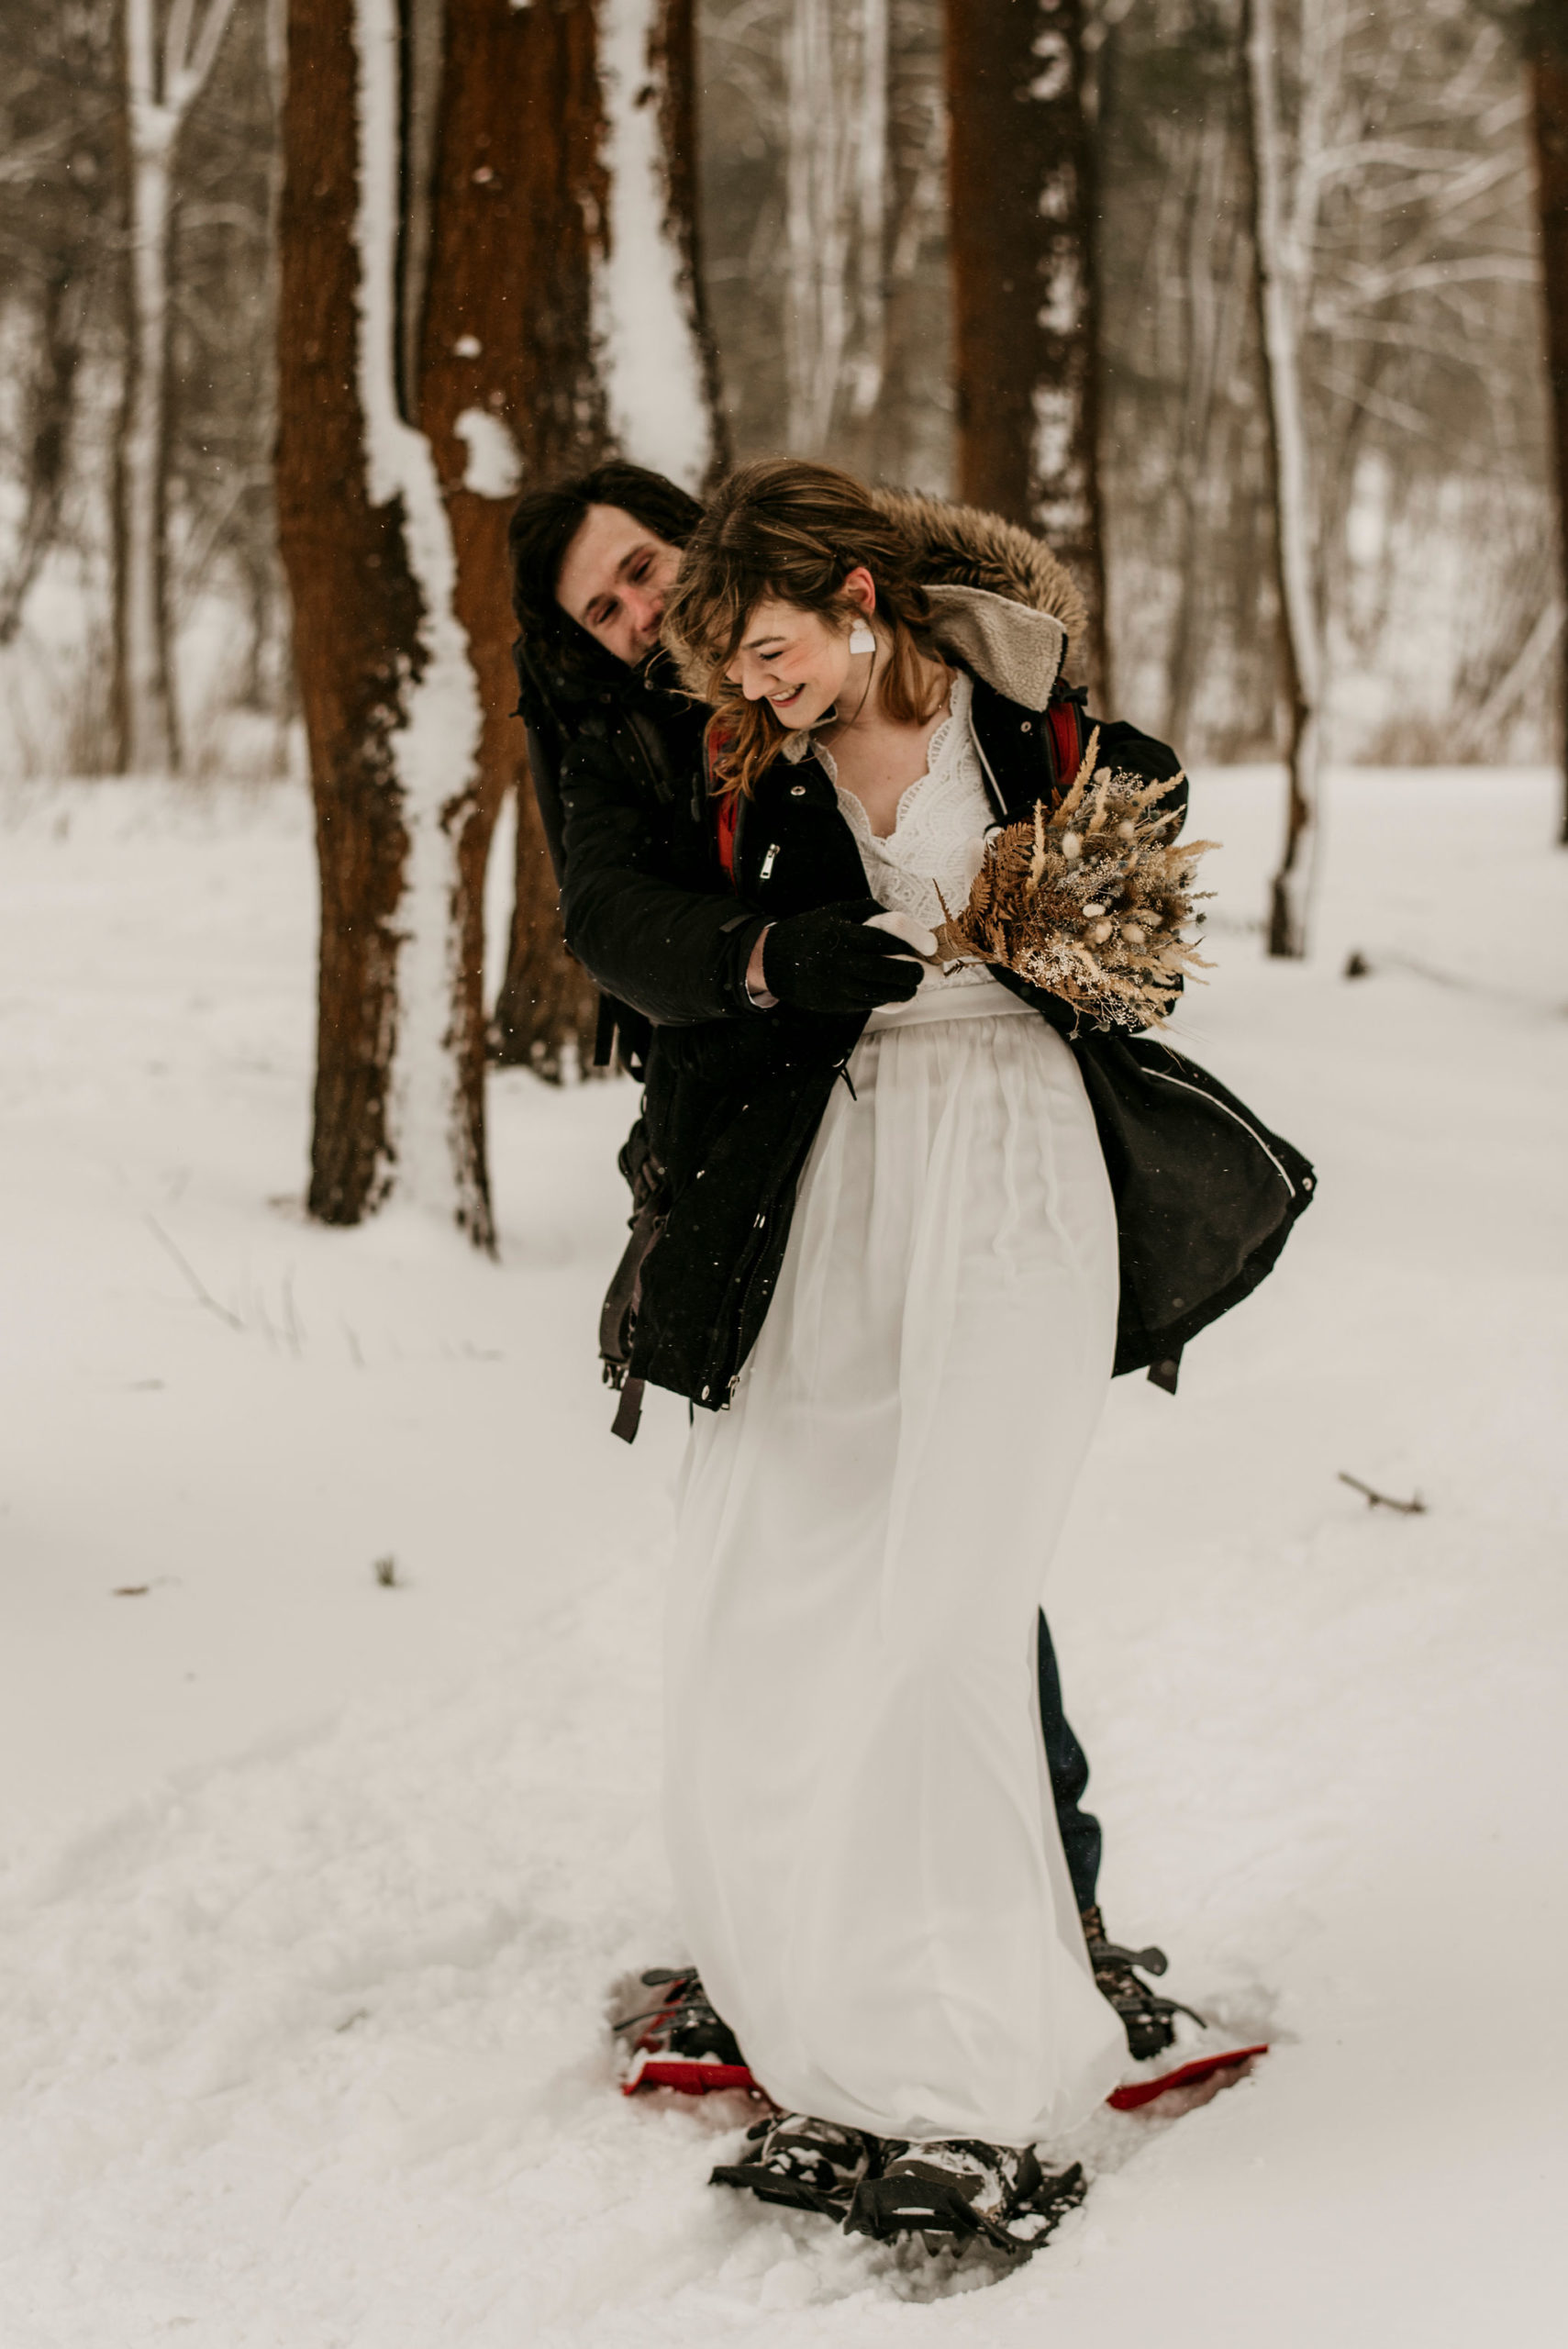 groom hugging bride from the back in a snowy forest | Tips For Your New York Winter Engagement or Elopement